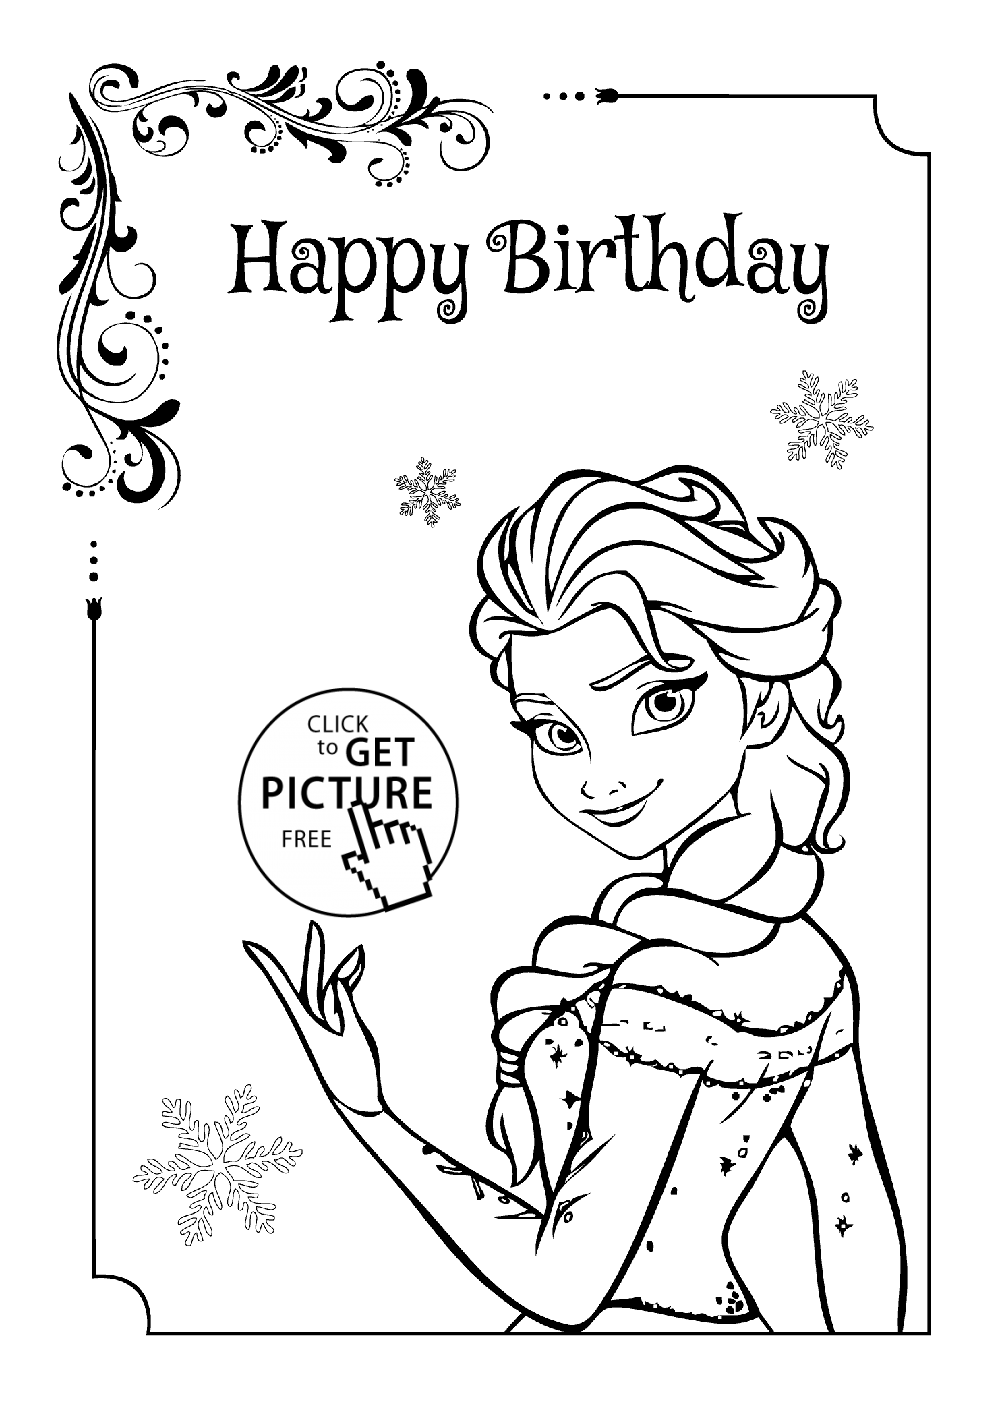 Frozen Black and White Logo - Happy Birthday personalized coloring page